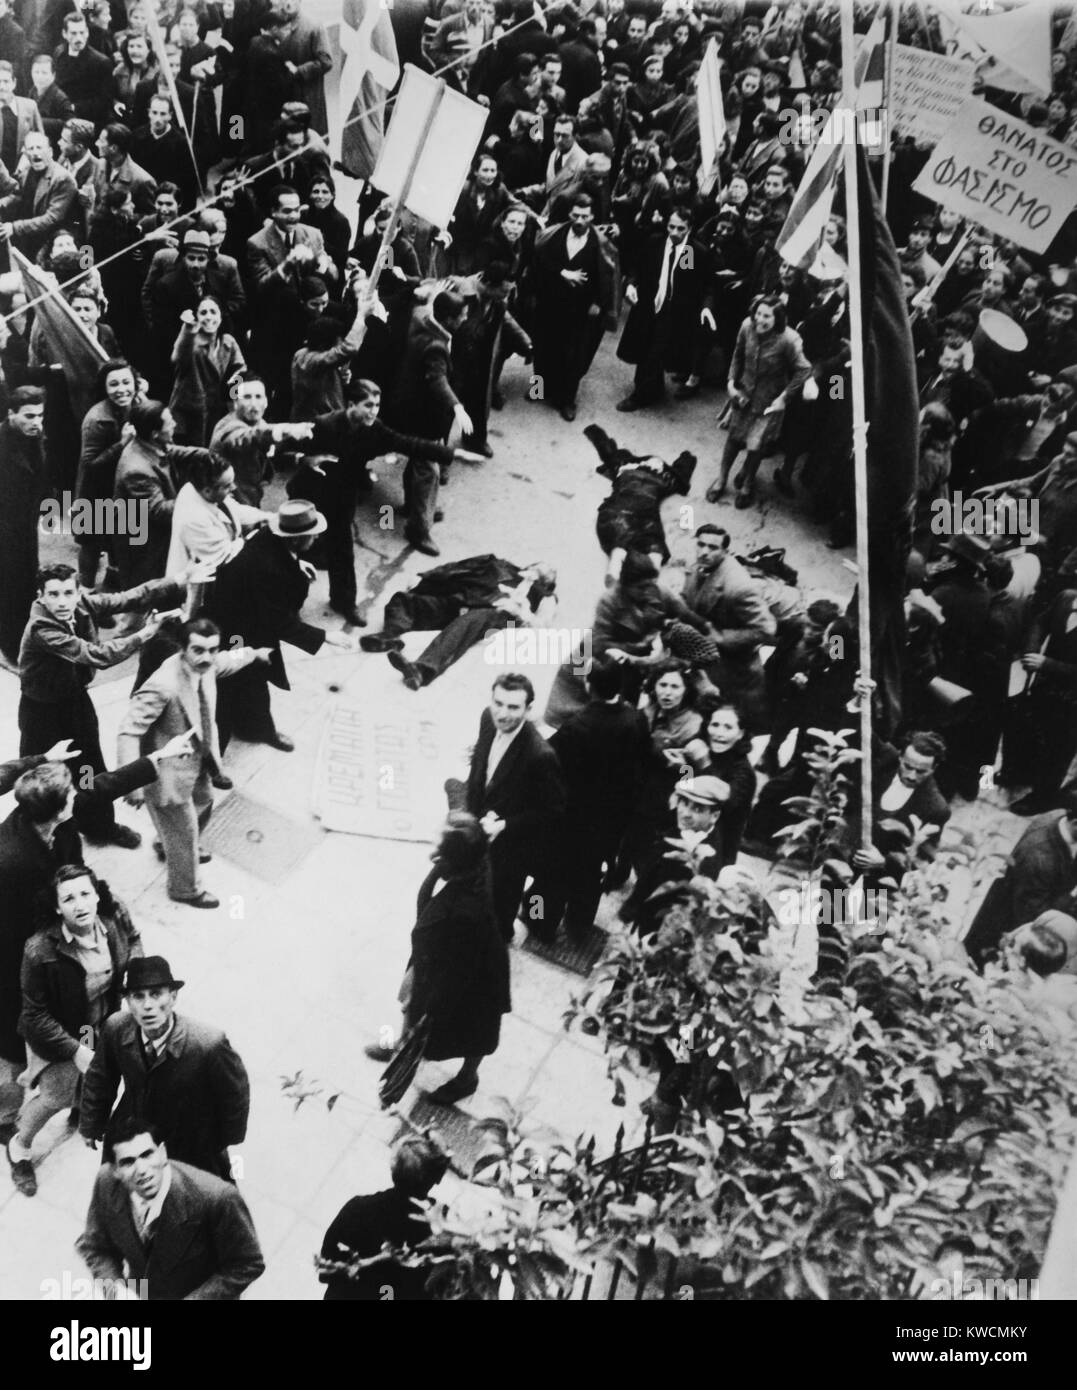 Crowd shouting and pointing towards a dead man and a woman lying in an Athens street. After liberation from the Germans, Greek politics between Leftists and Communists against the Rightists and Royalists became violent. Dec. 18, 1944. - (BSLOC 2014 15 220) Stock Photo